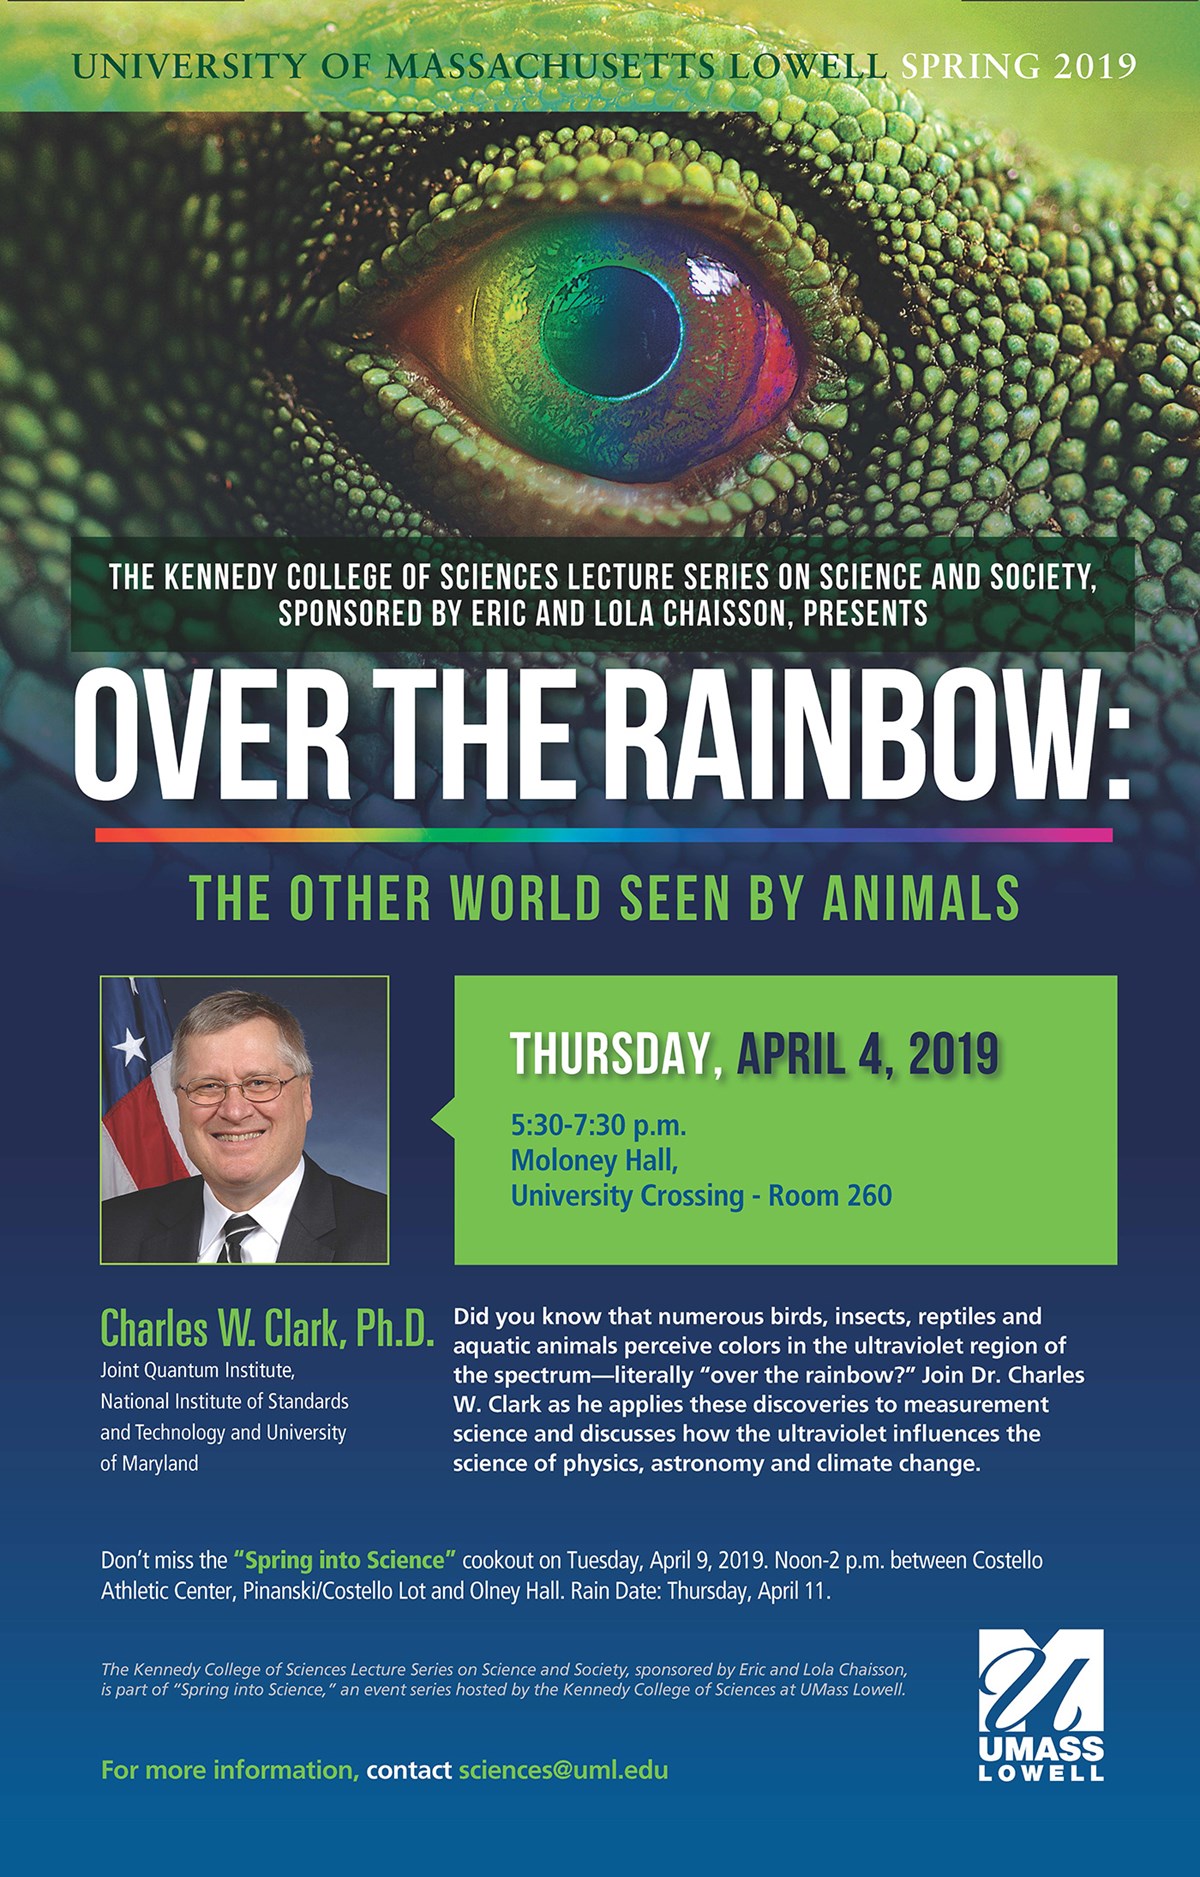 Poster for: Over the Rainbow: The Other World Seen by Animals The Kennedy College of Sciences Lecture Series on Science and Society sponsored by Eric and Lola Chaisson. Did you know that numerous birds, insects, reptiles and aquatic animals perceive colors in the ultraviolet region of the spectrum—literally “over the rainbow?”